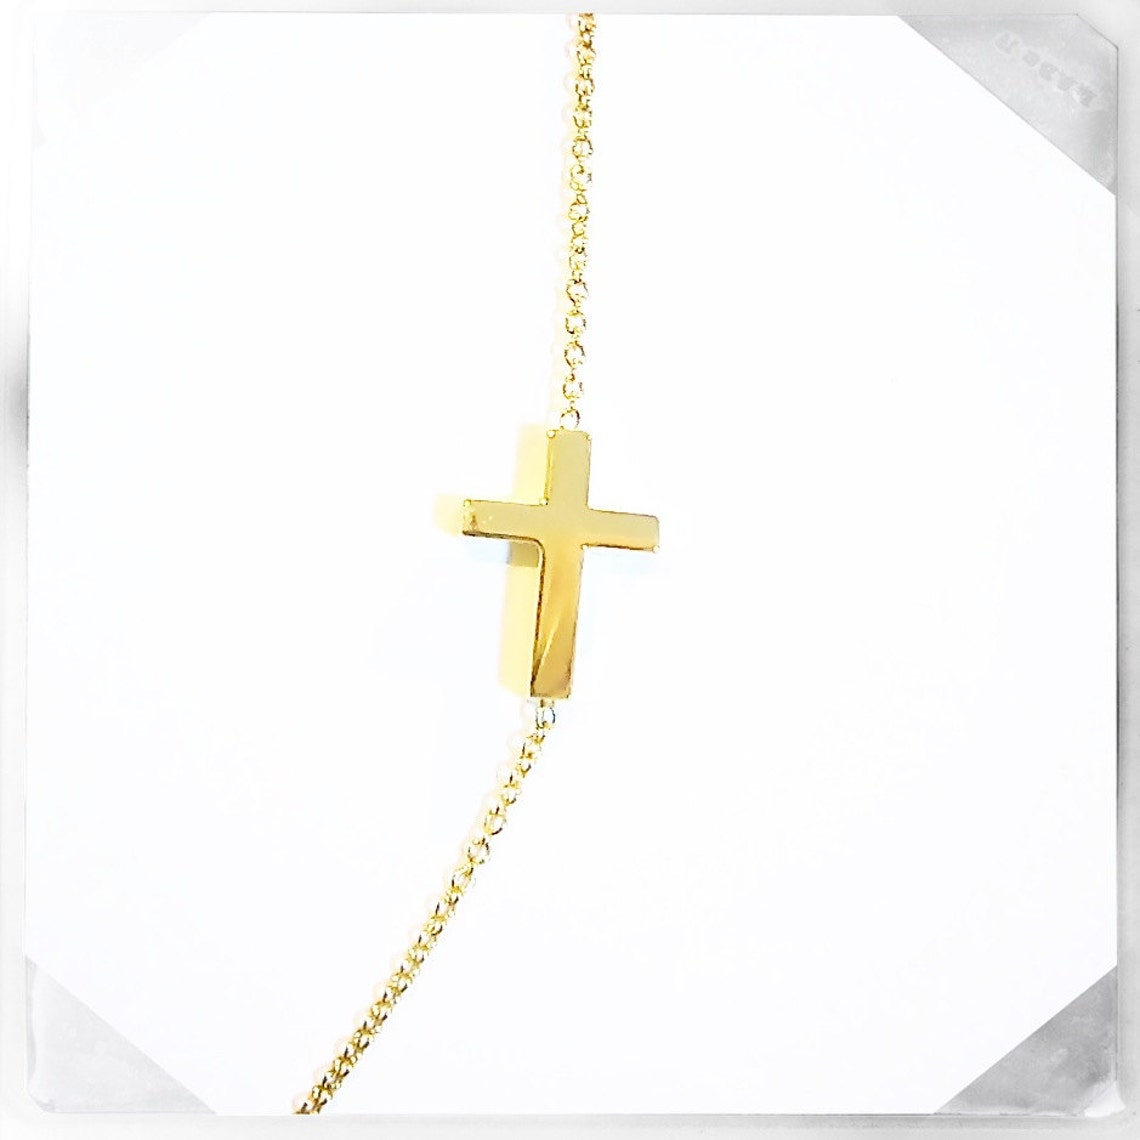 Off-center Sideways Small Cross Necklace // 14k Yellow White - Etsy